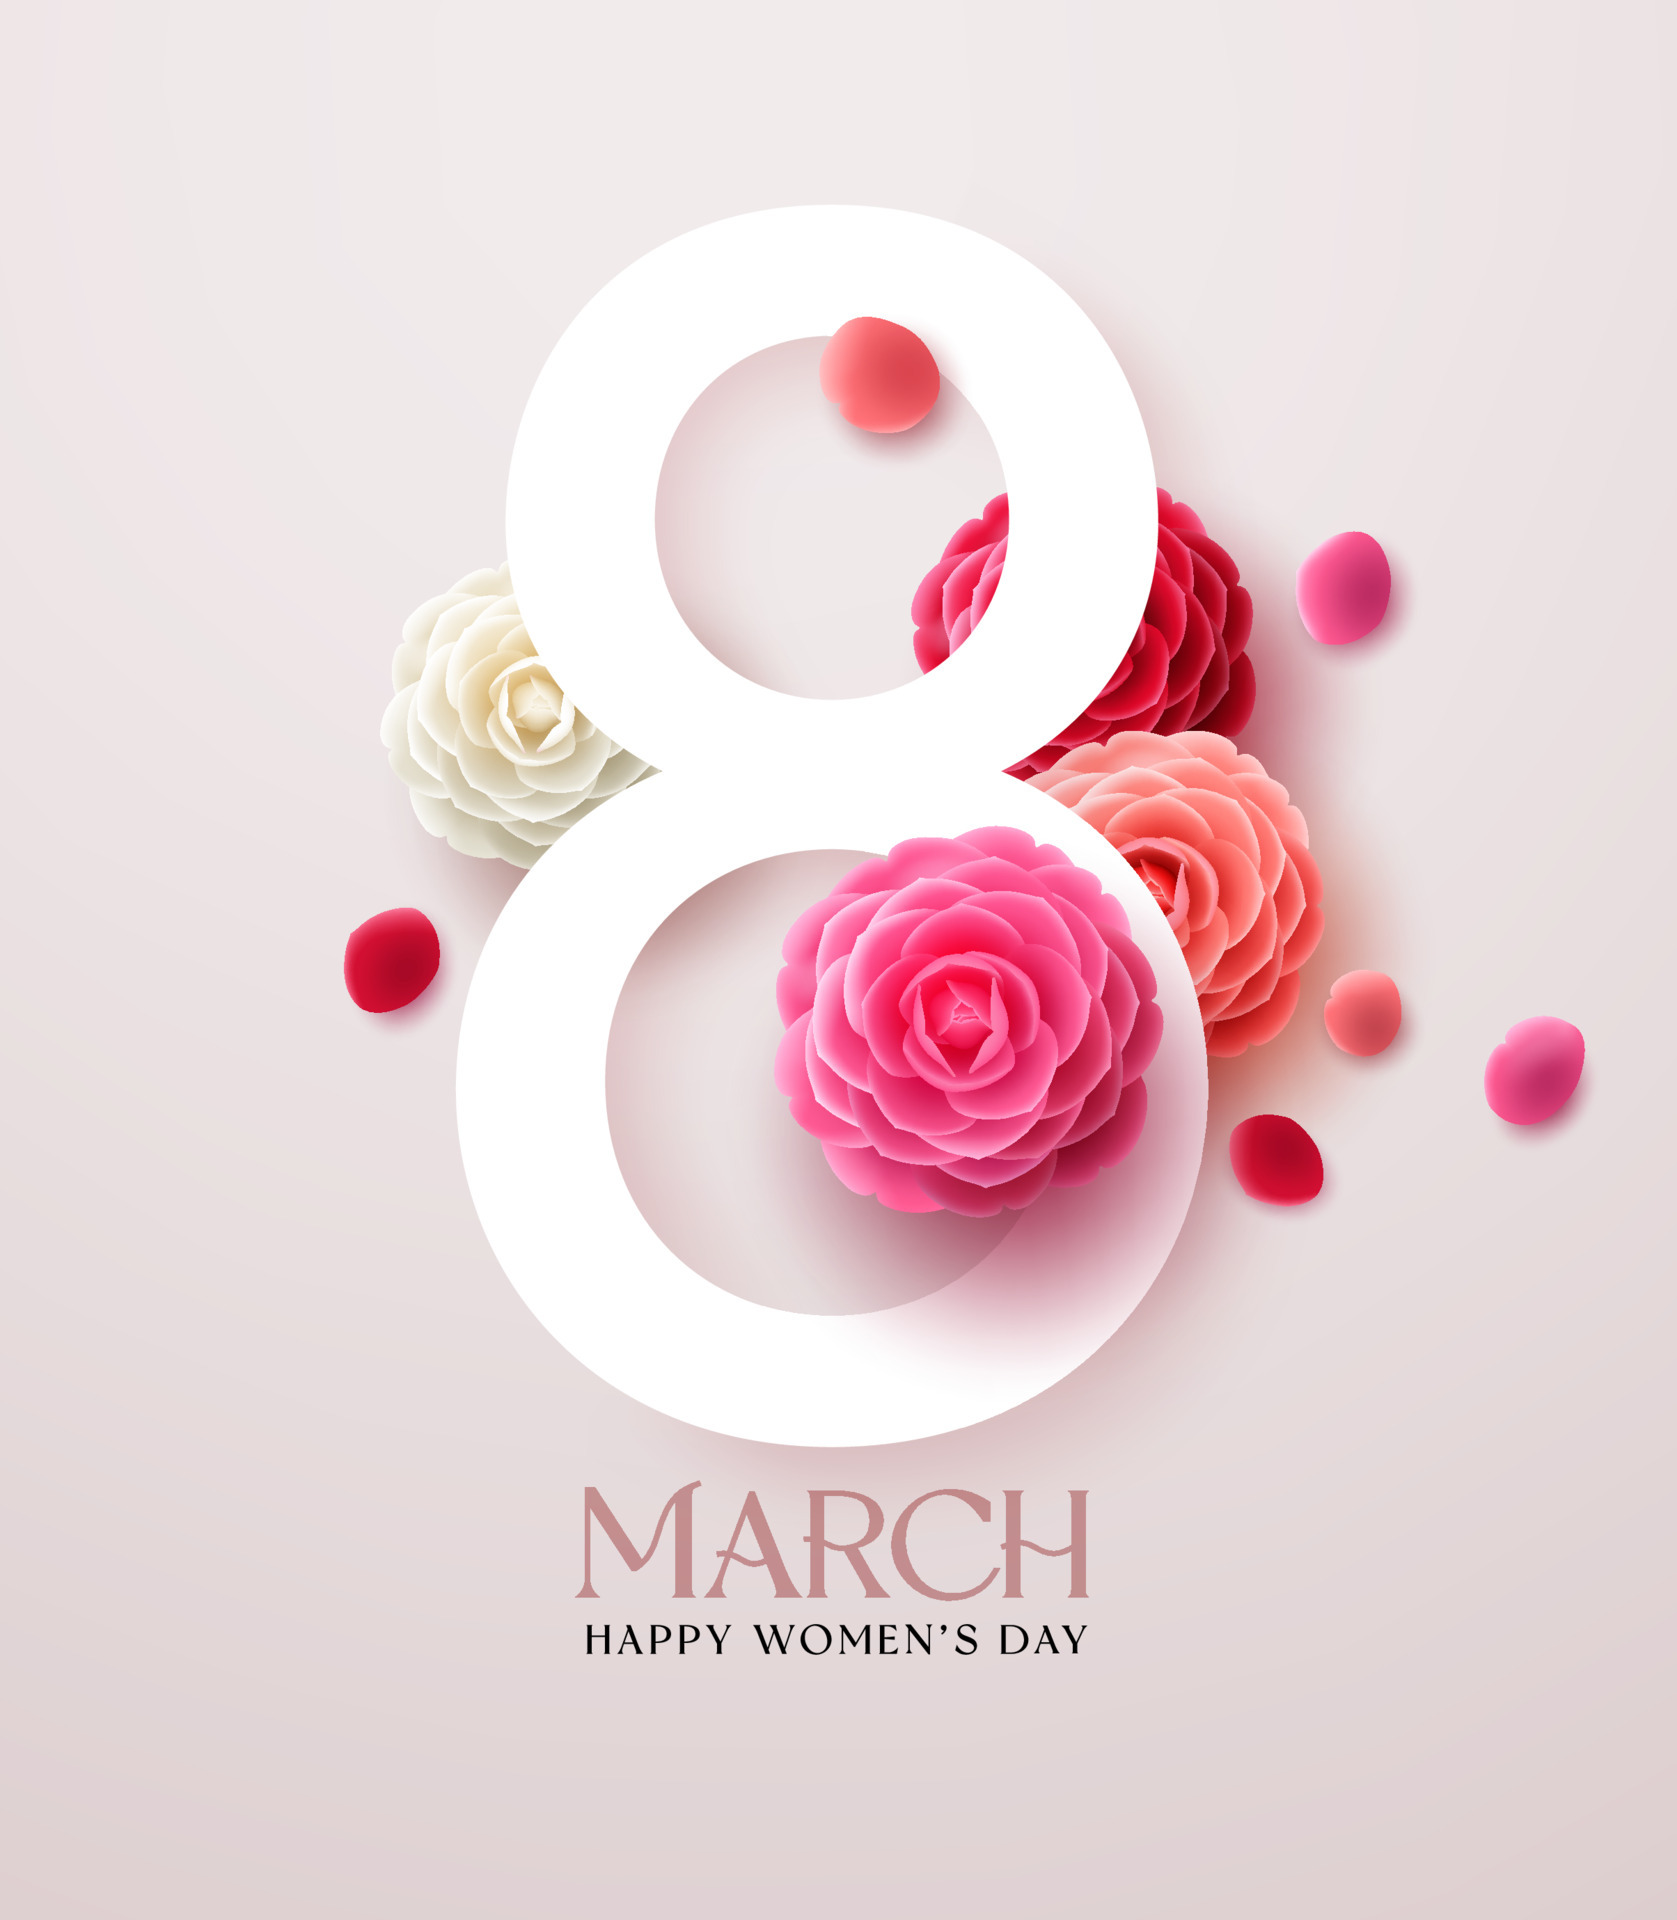 Камелия 8. 8 March Womens Day Design.